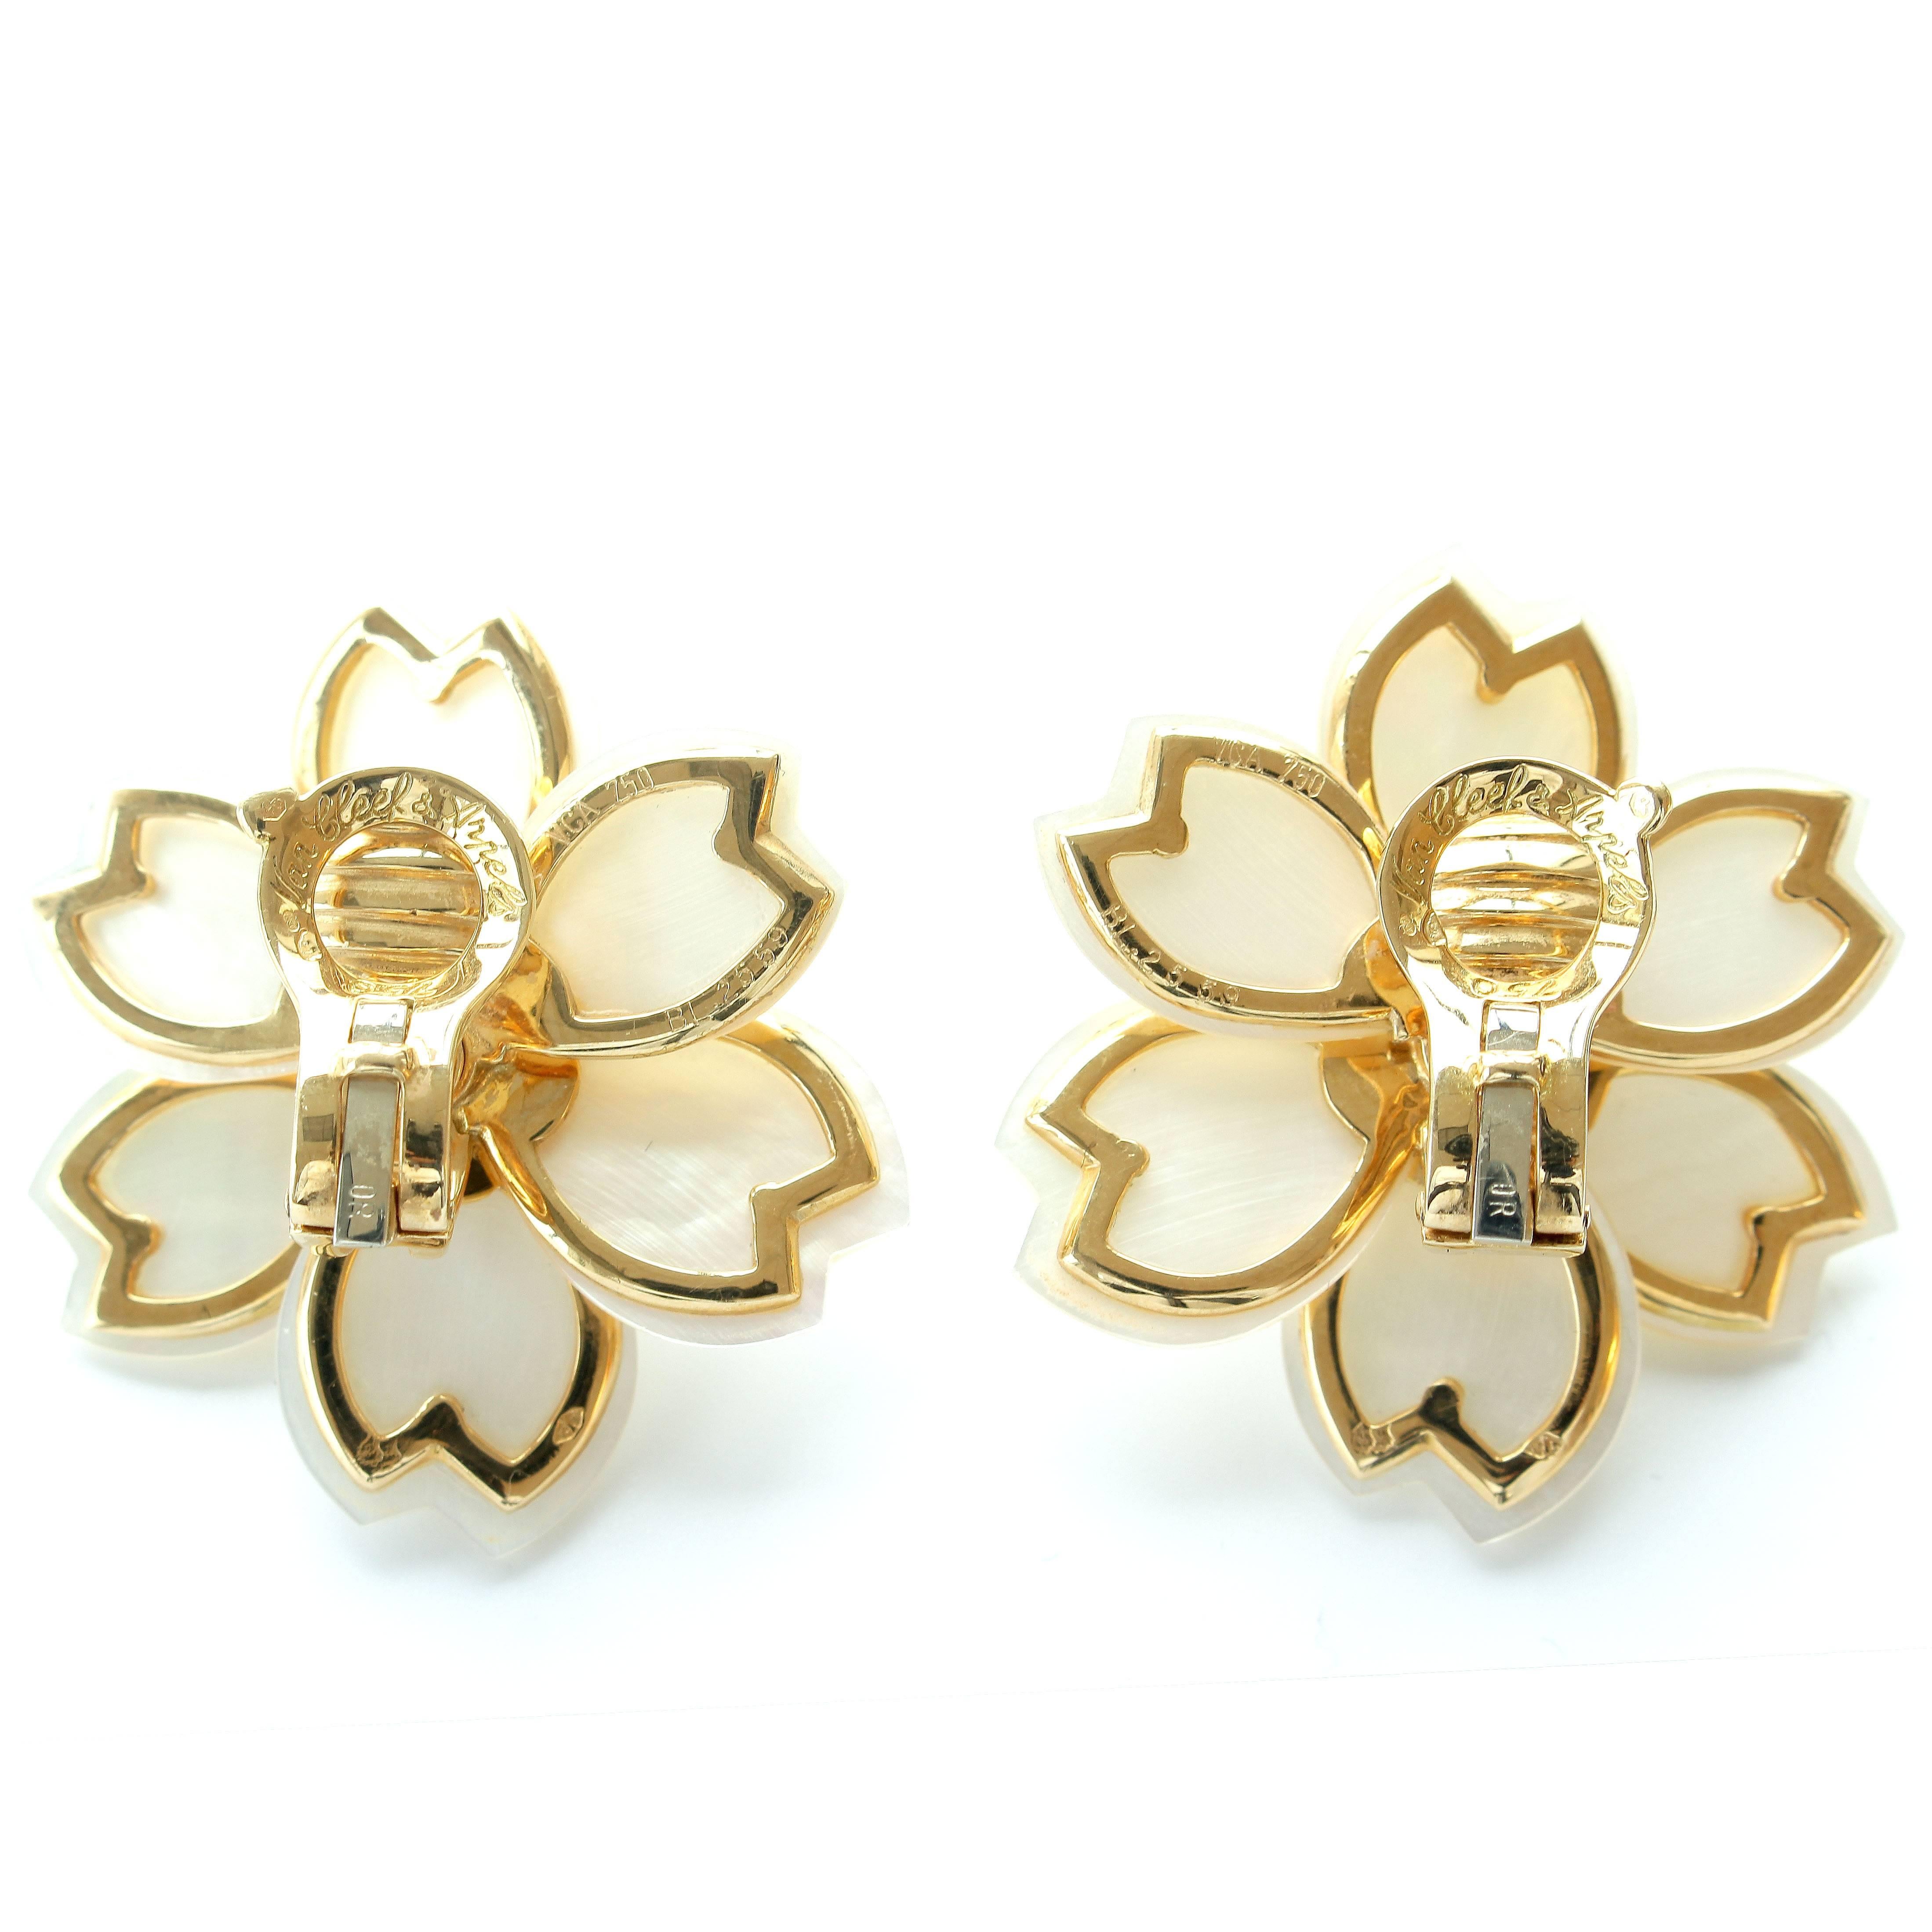 Blossoming brilliance by Van Cleef & Arpels. Designed with shinning white mother of pearl petals and perfectly placed colorless diamonds to create the flower motif. Crafted in 18k yellow gold. Signed VCA, numbered and stamped with French